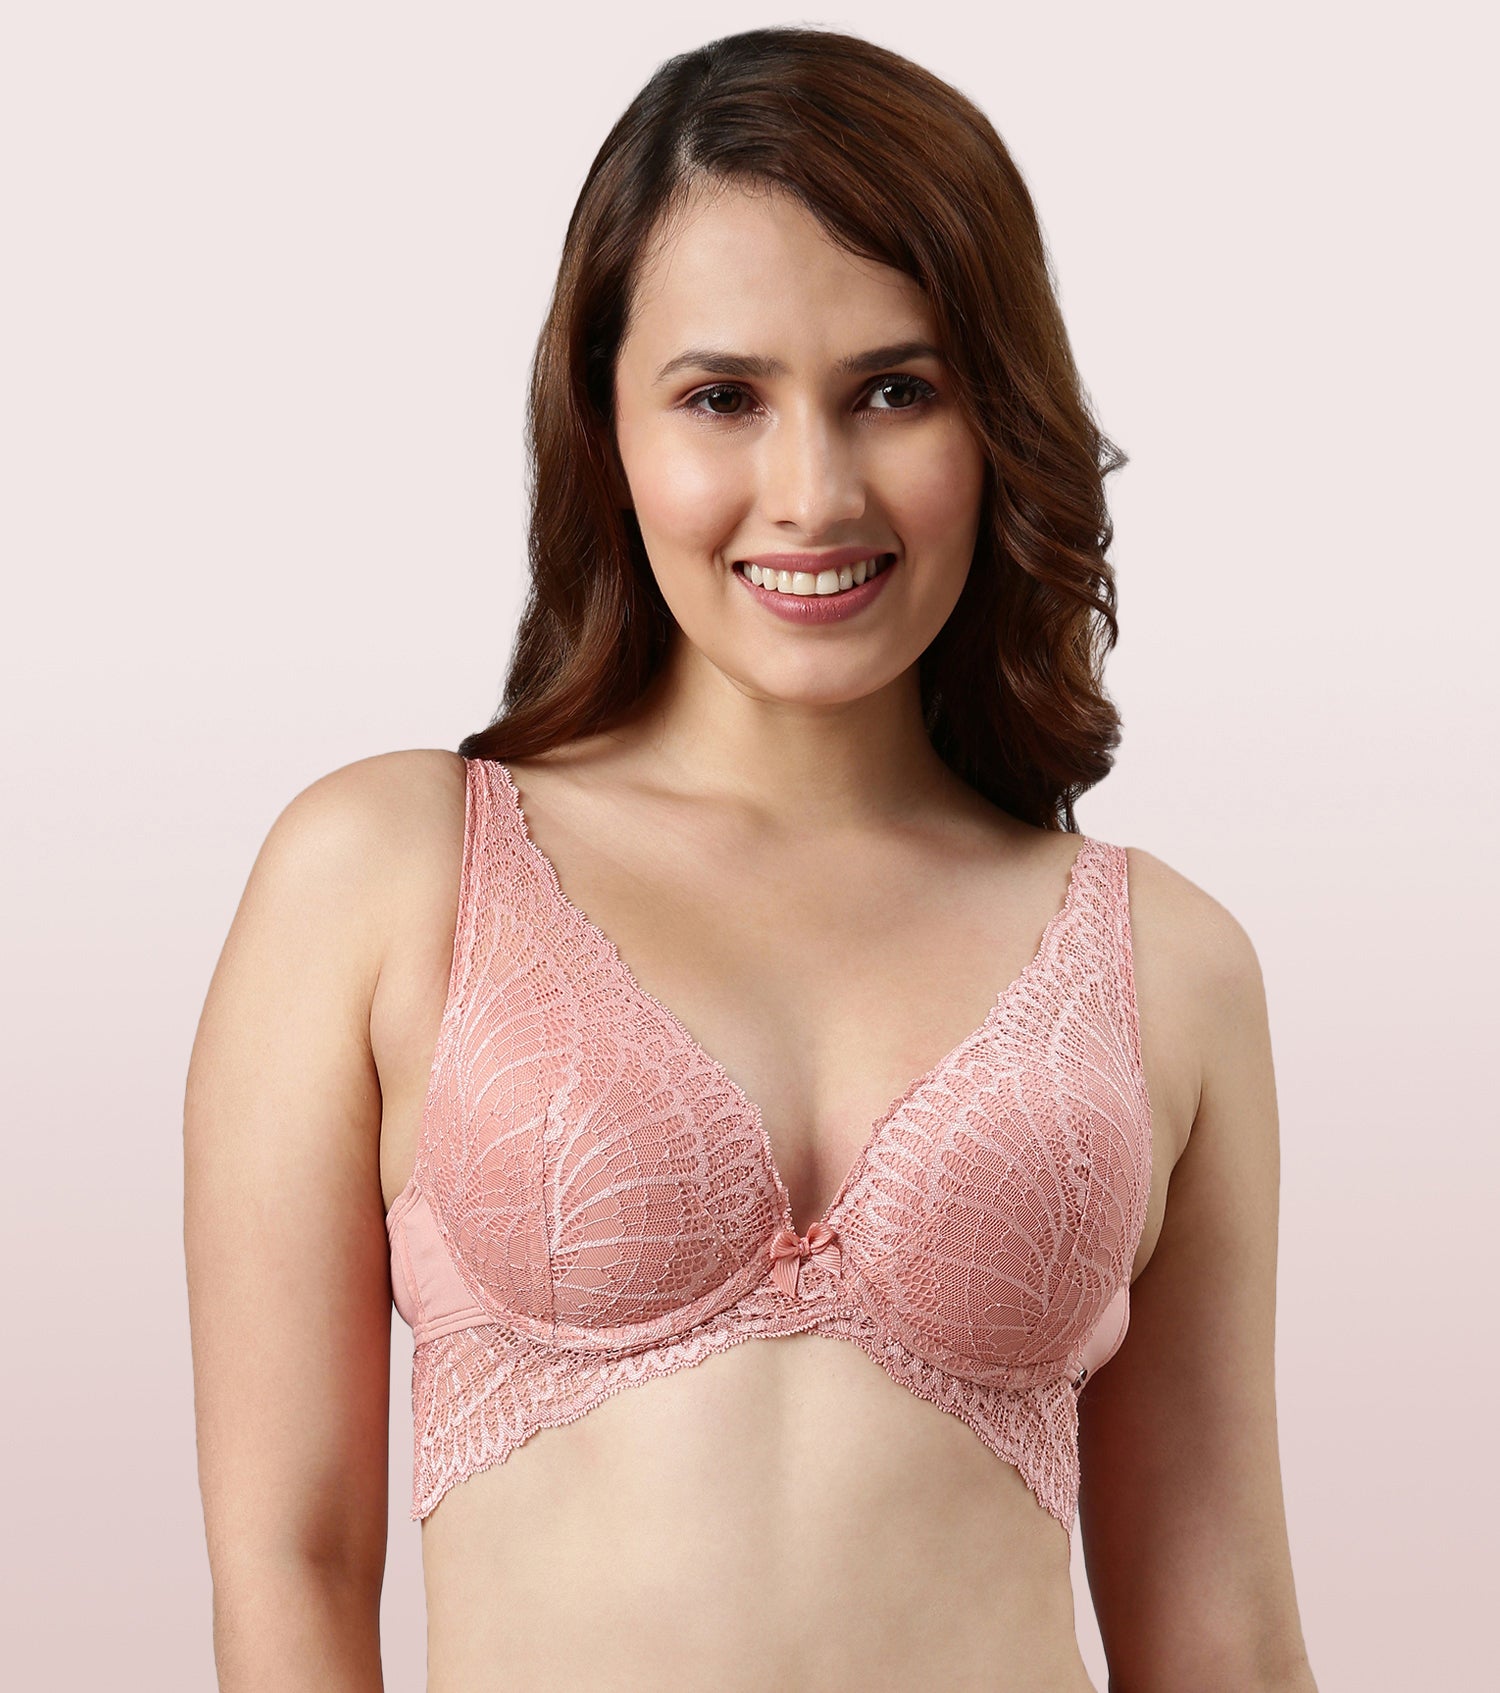 CHGBMOK Clearance Push Up Bras for Women Wirefree India